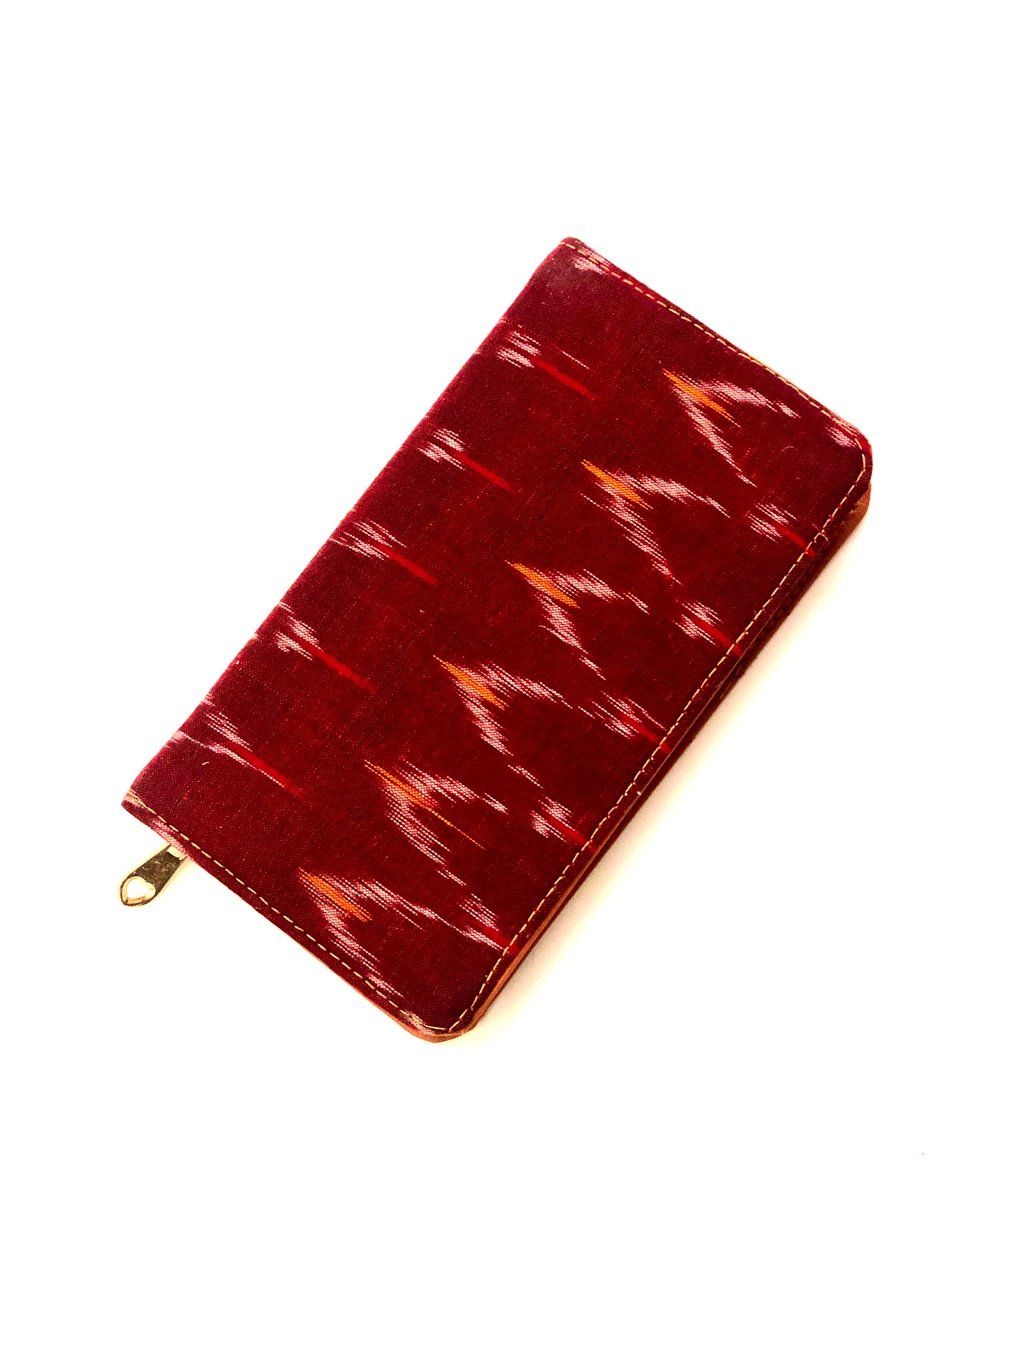 Exclusive Designer Clutch In Various Bright Colors Fashion Tamrapatra